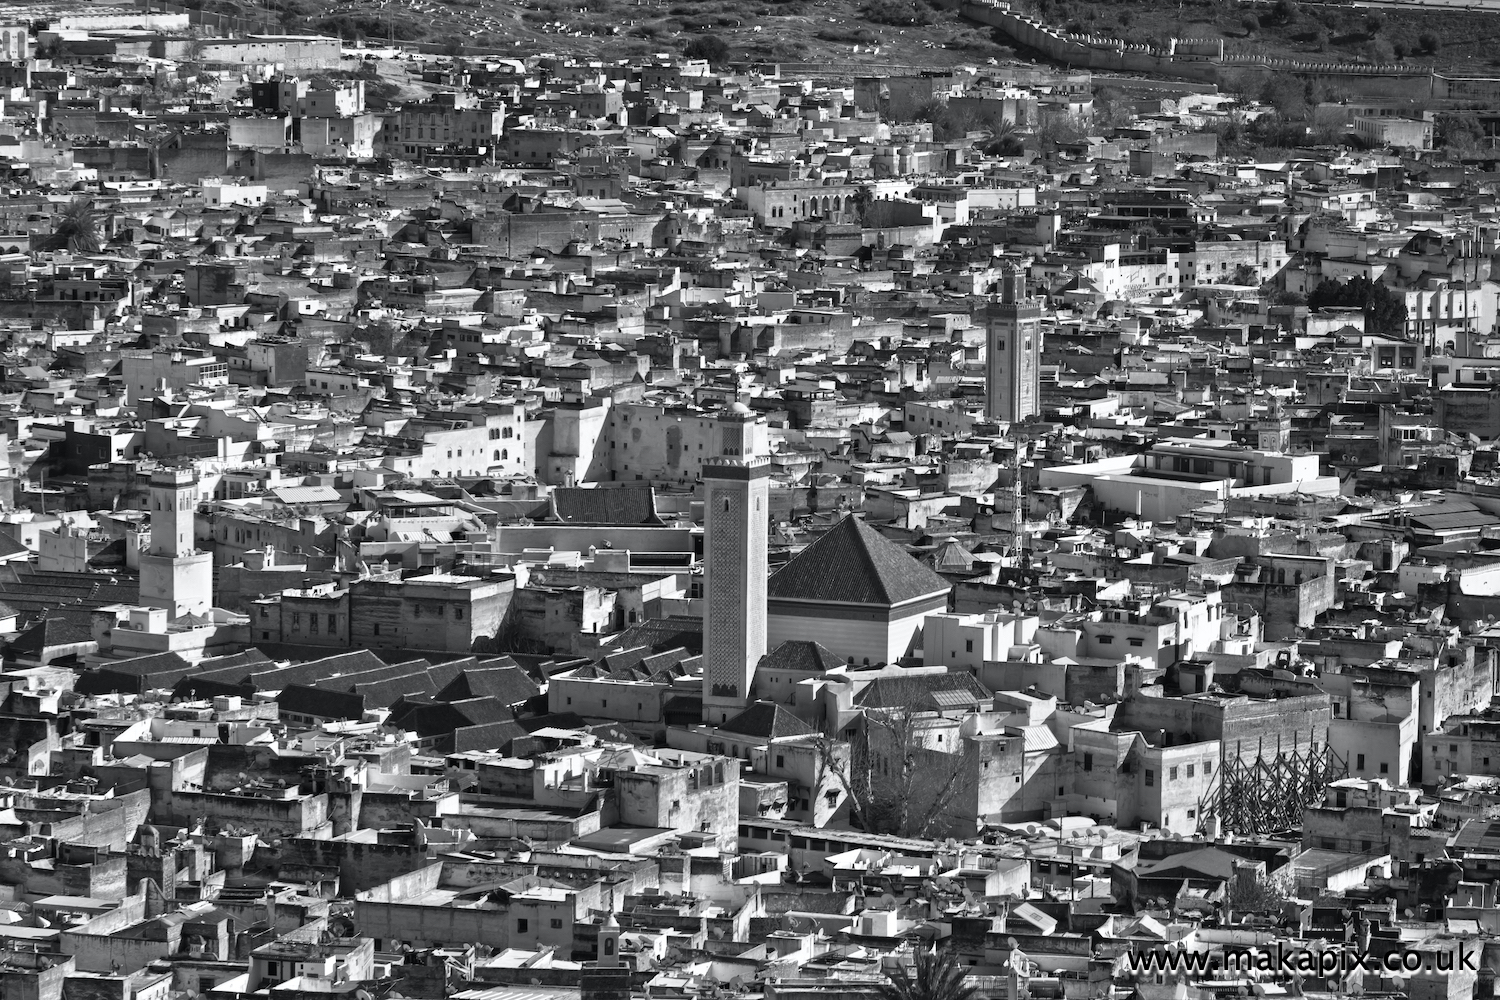 Landscape view of the medina from the Marinid Tombs, Fes, Morocco